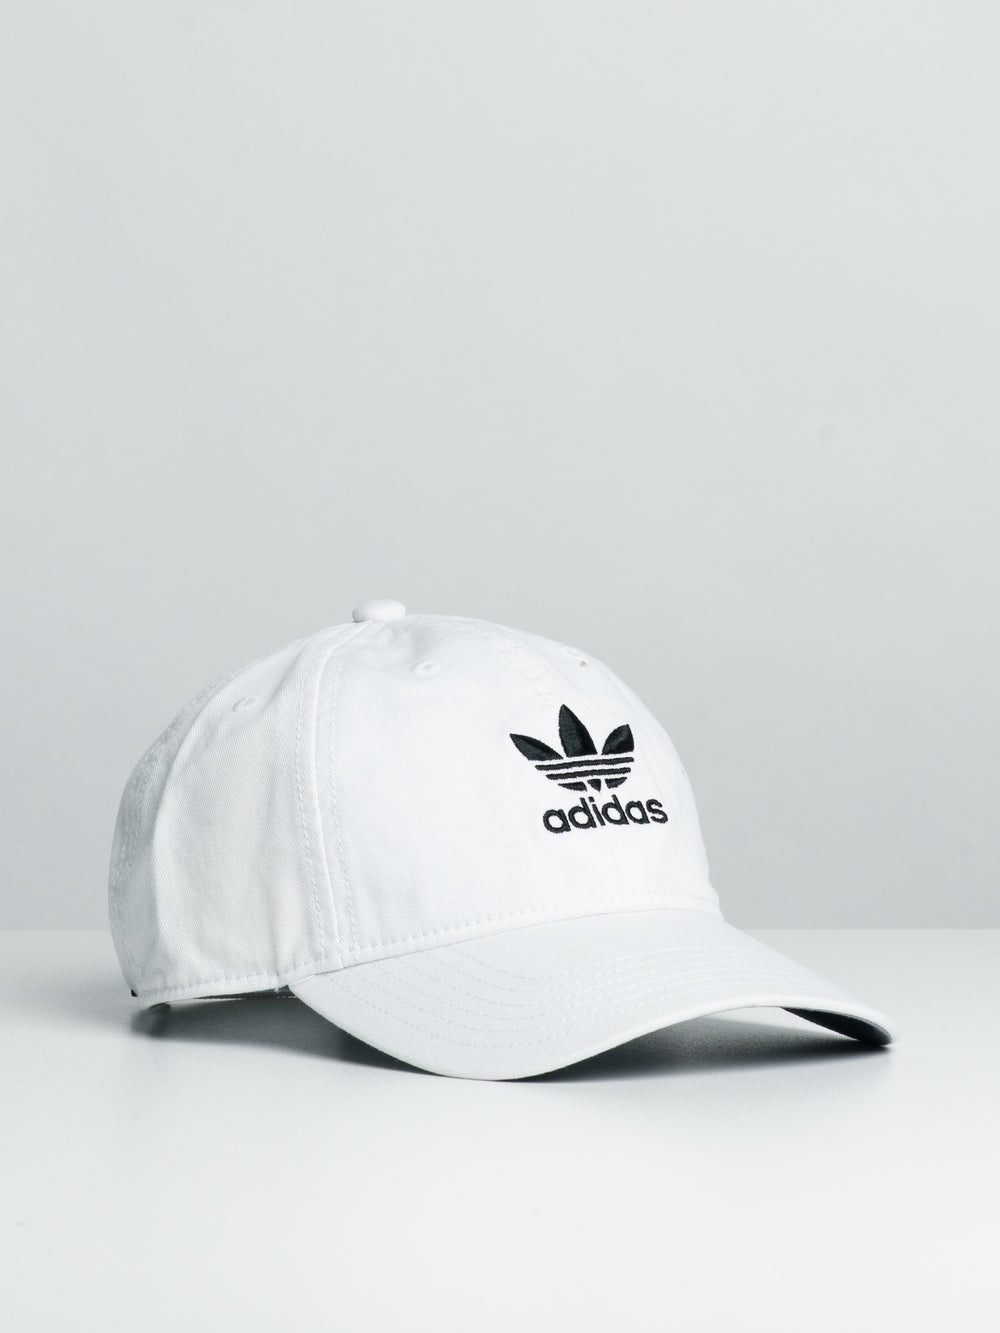 ADIDAS ORIGINAL RELAXED STRAPBACK HAT - CLEARANCE